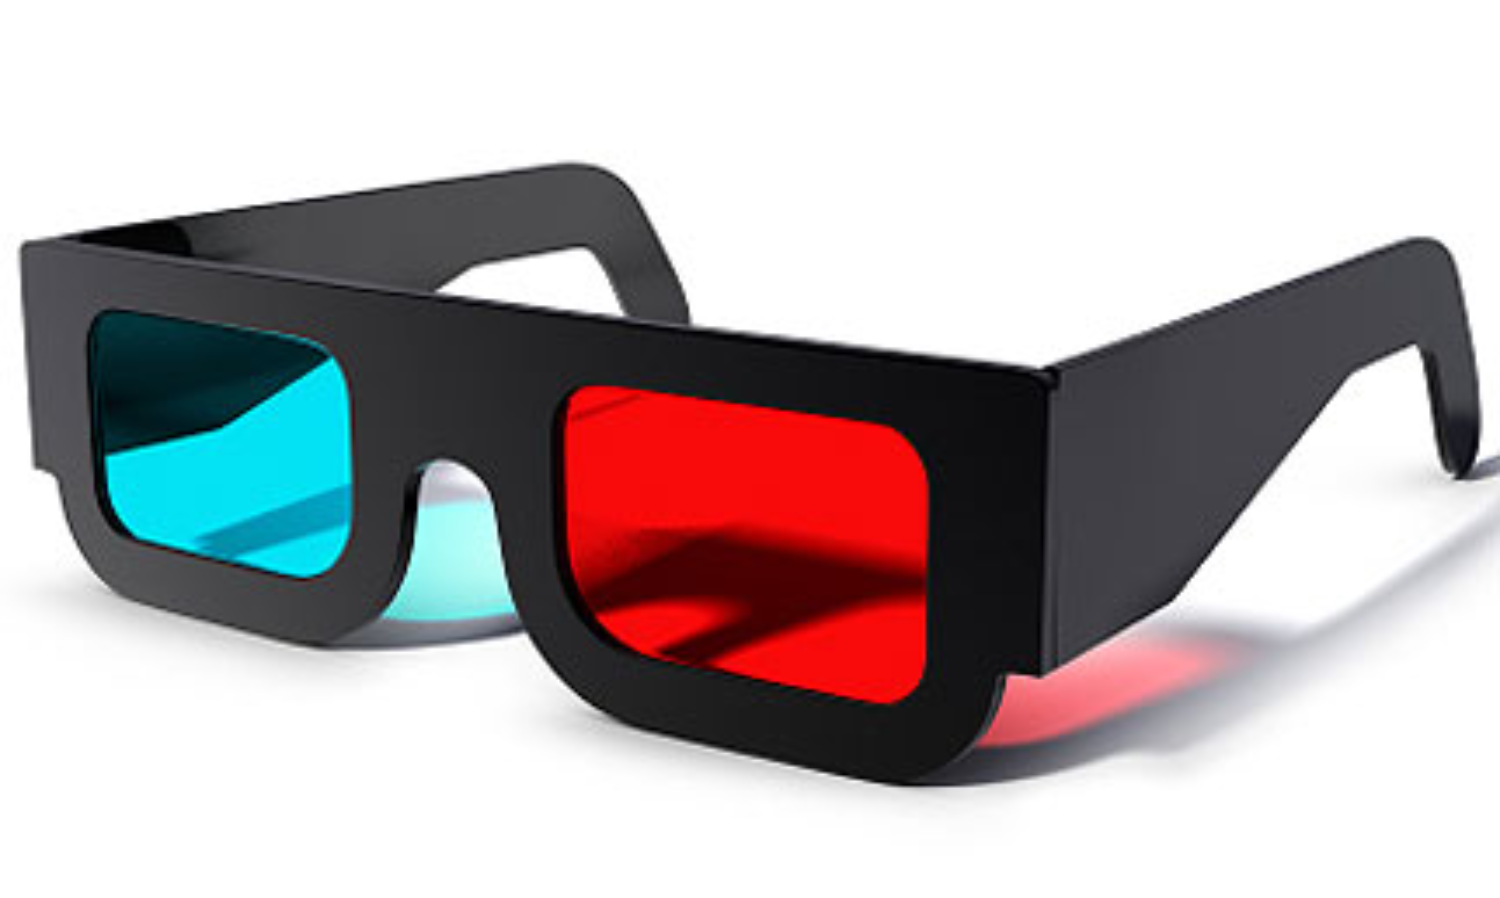 3D Glasses For 3D Movies Should Be Supplied Free Of Cost If ...